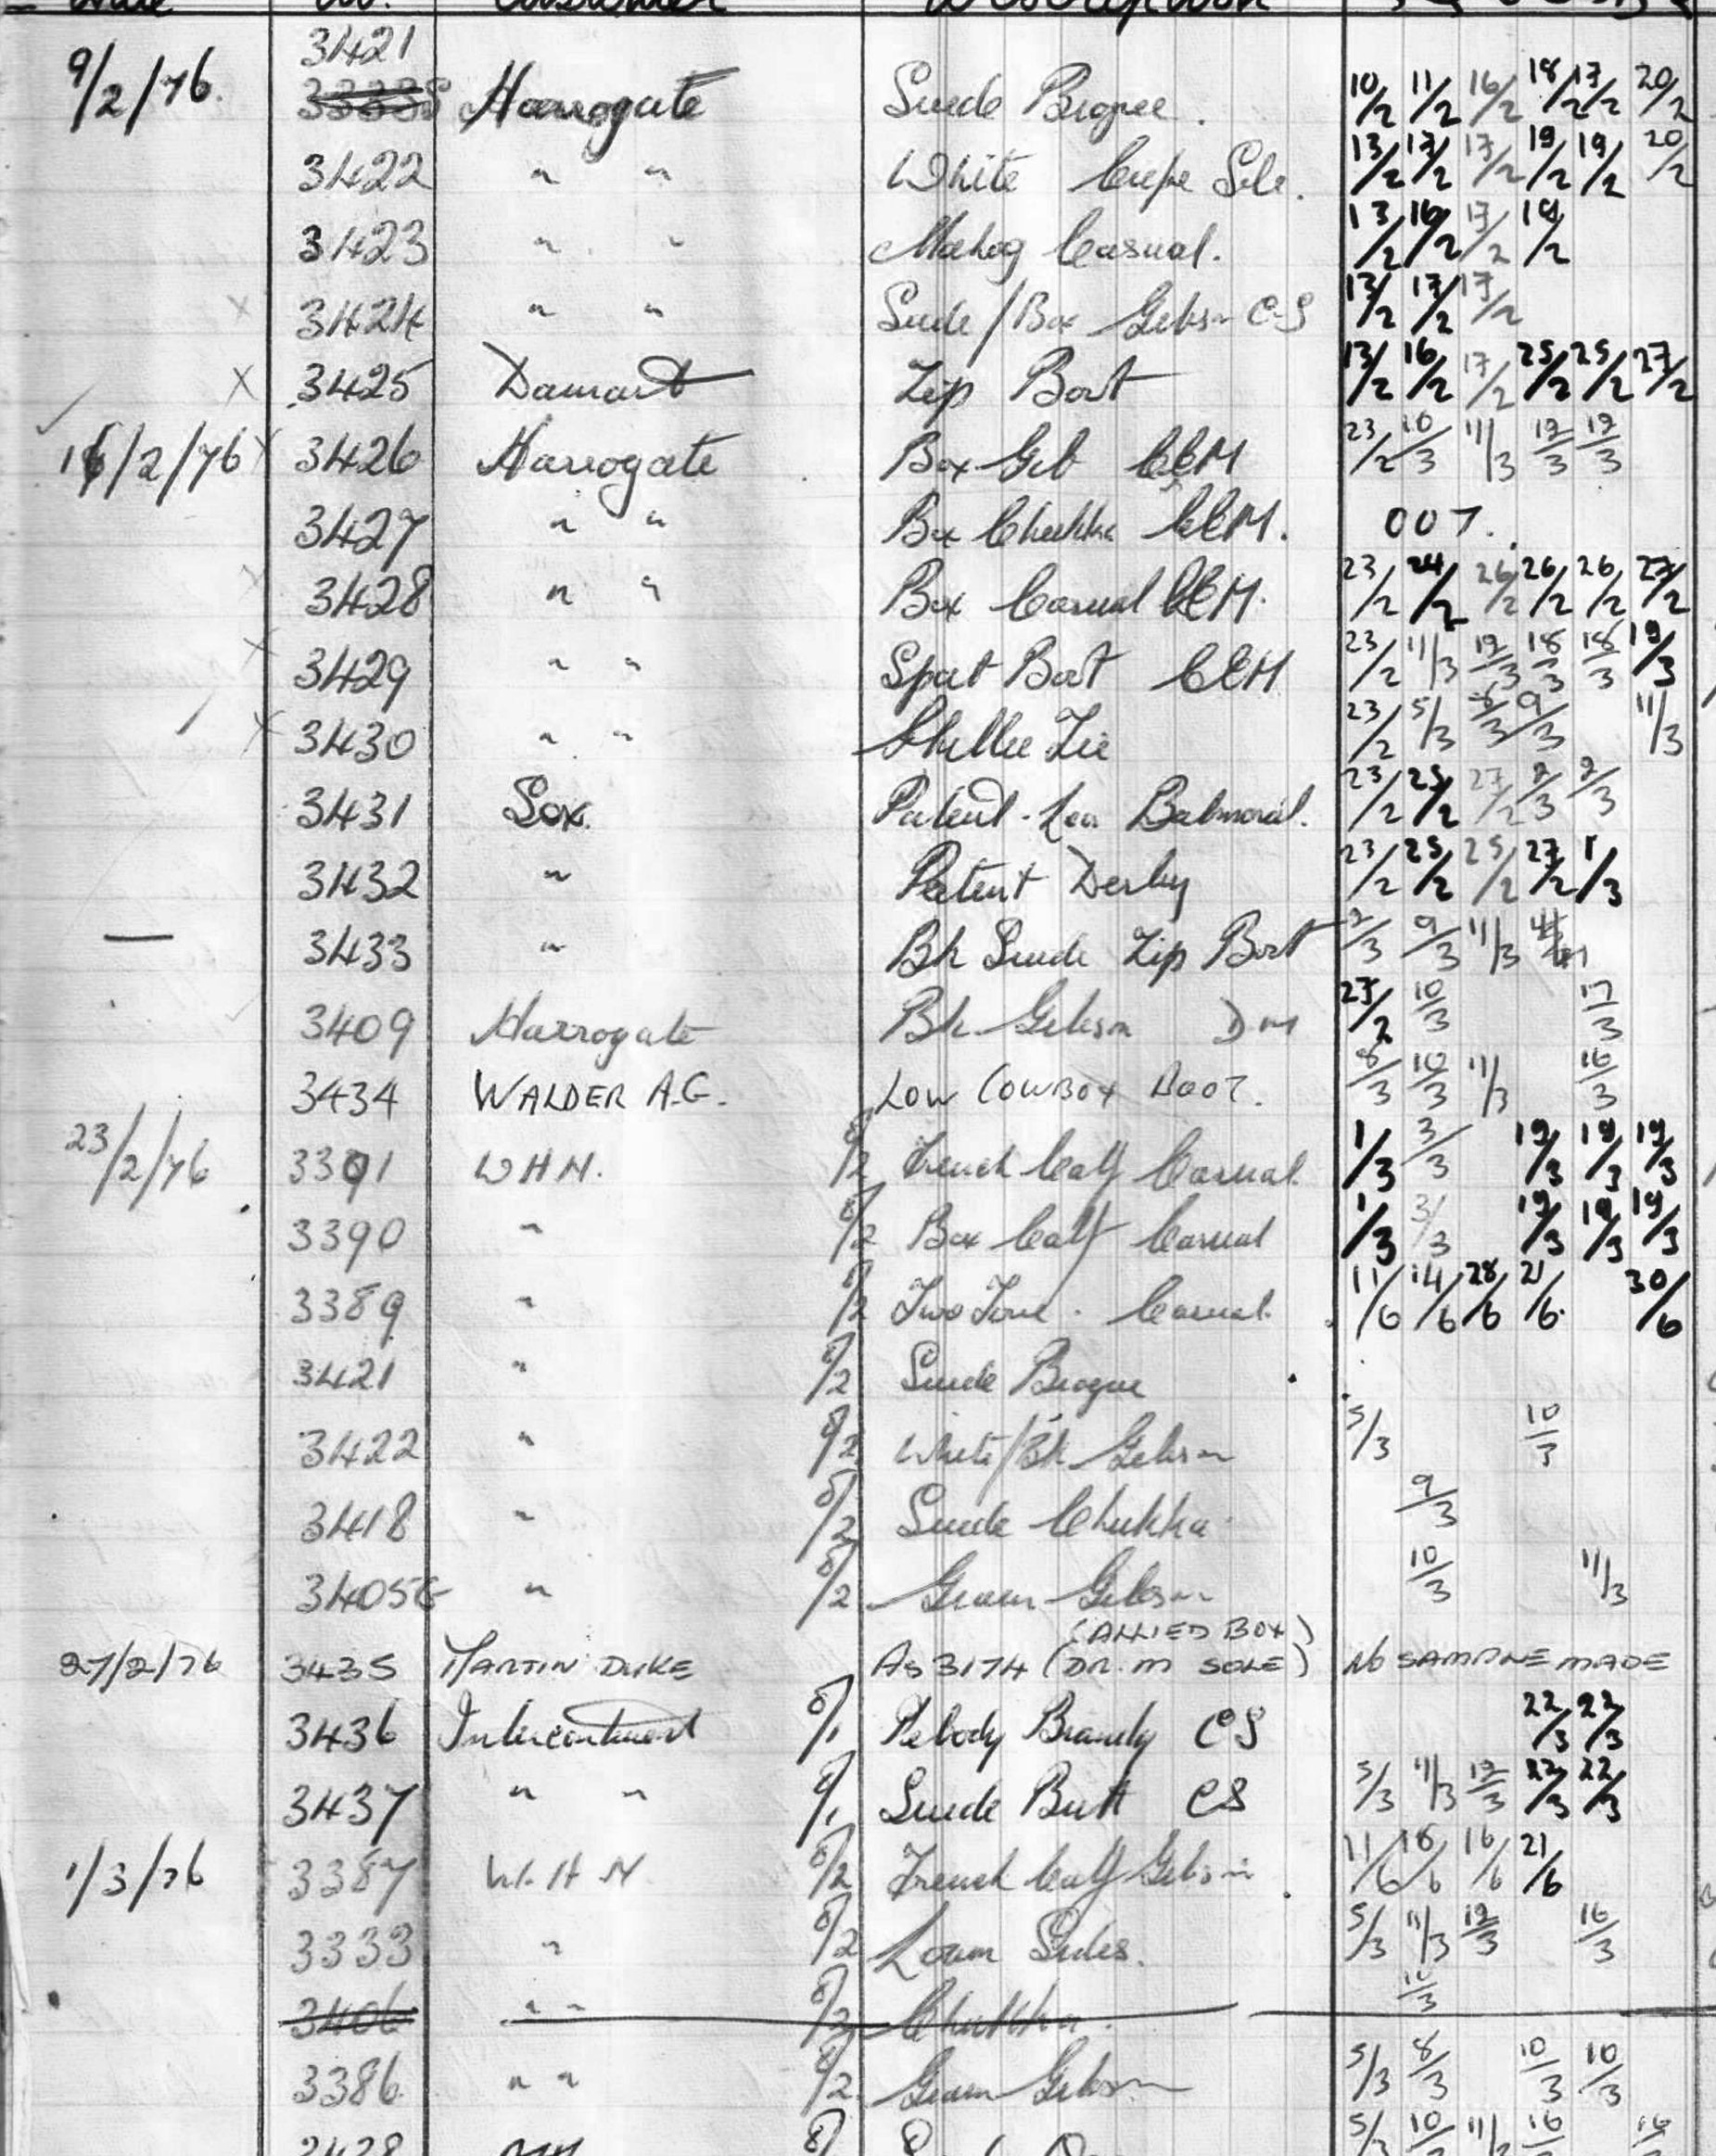 Excerpt from an old order book, with order from the store, Sex